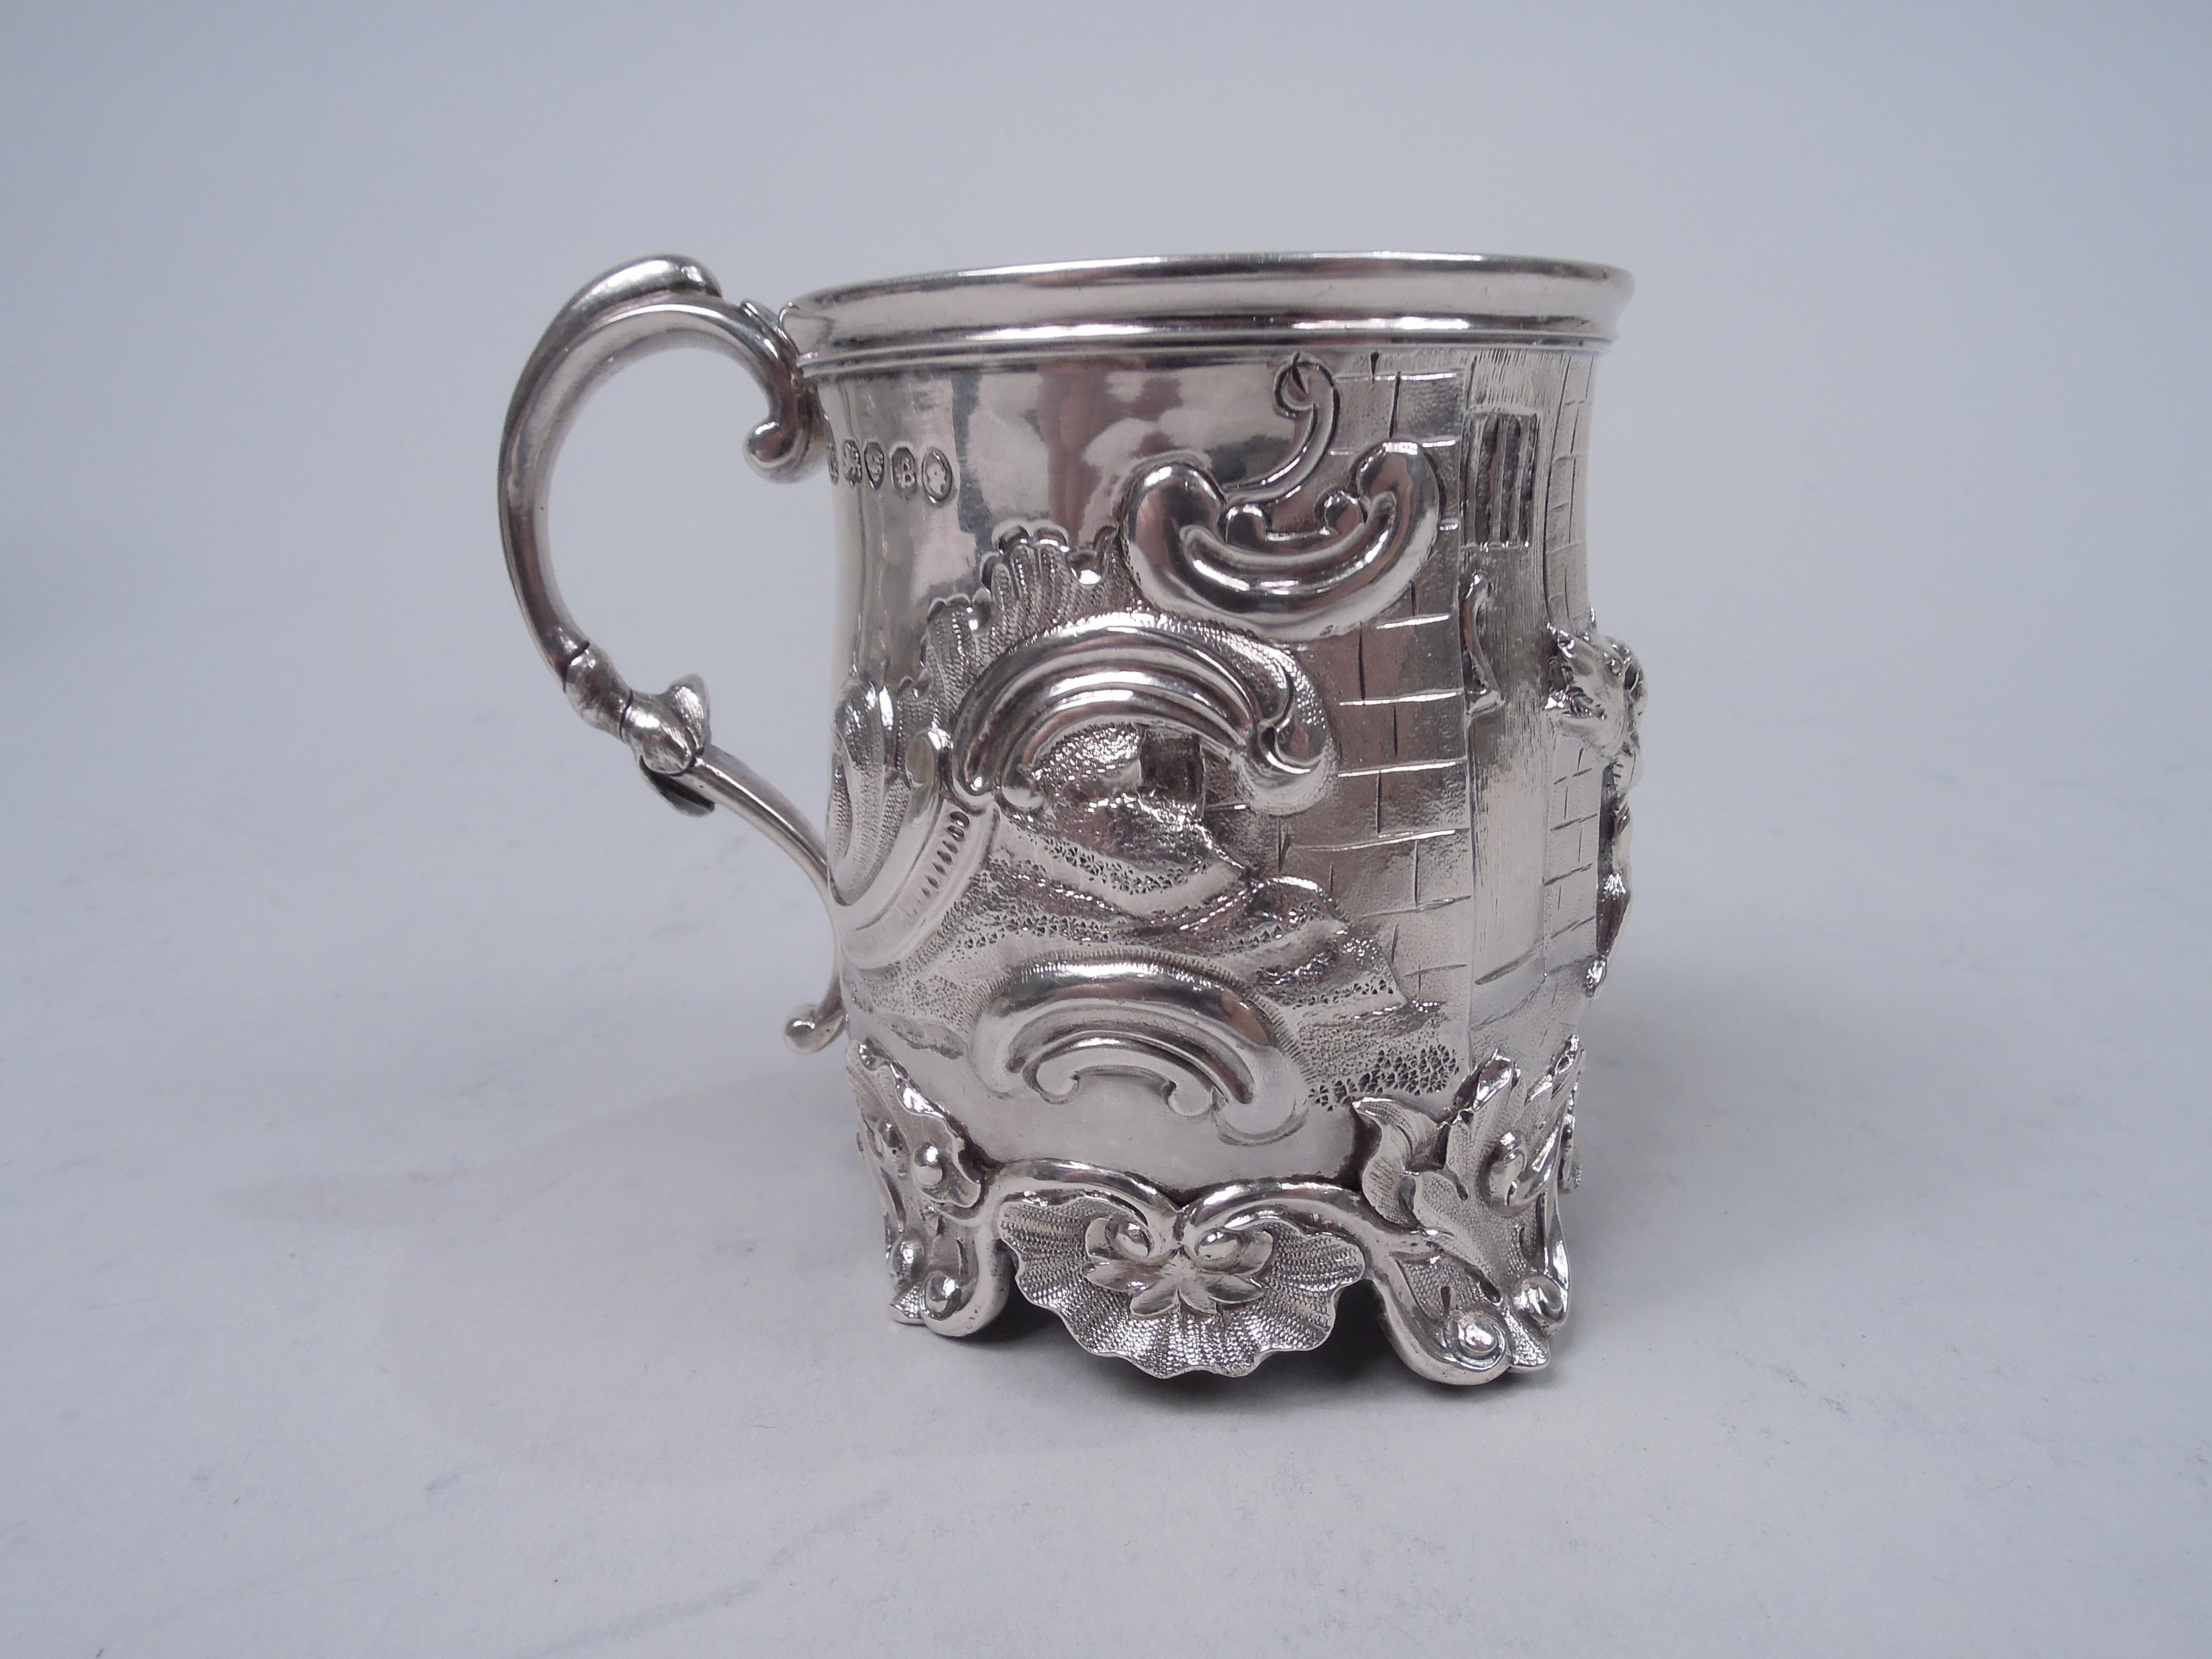 English Georgian sterling silver baby cup, 1837. Bowl has curved sides and scrolled foot rim with applied scallop shells and four leaf and shell supports; leaf-capped double-scroll handle. Gilt interior. Chased and engraved scene of boy riding on